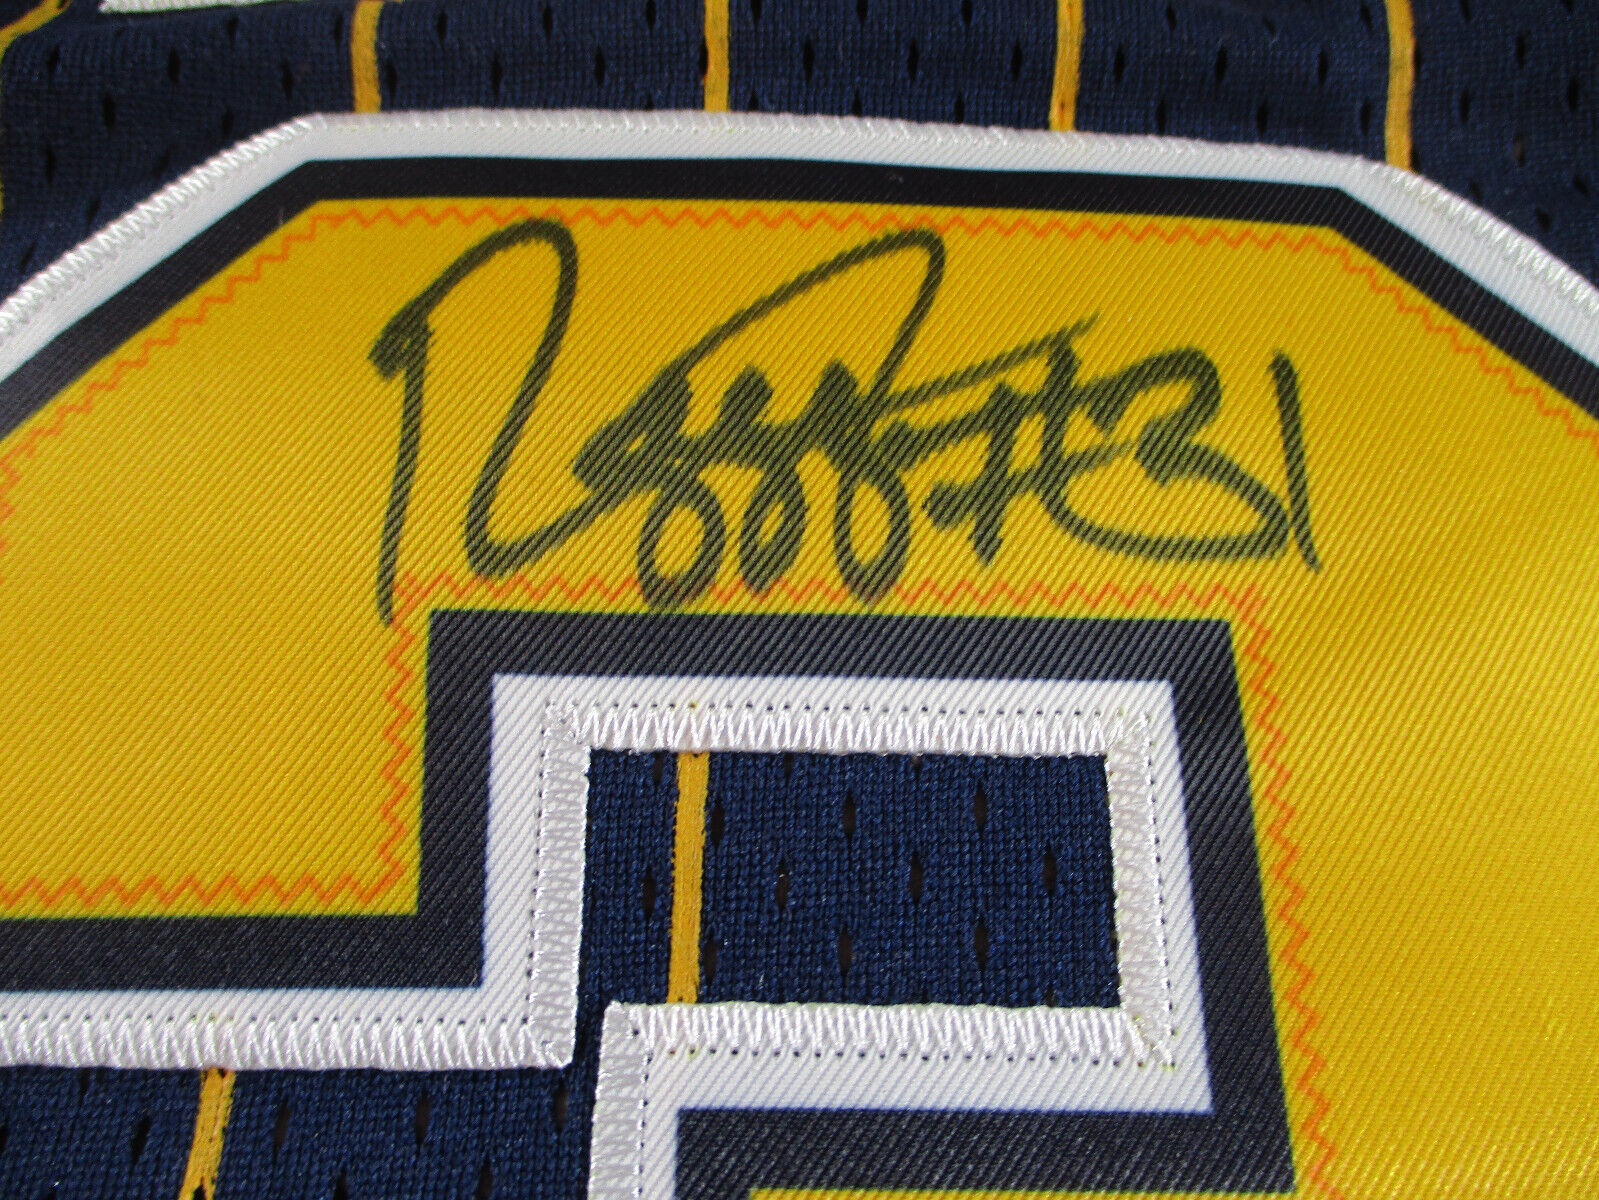 Reggie Miller / Autographed Indiana Pacers Blue Pro Style Throwback Jersey / COA